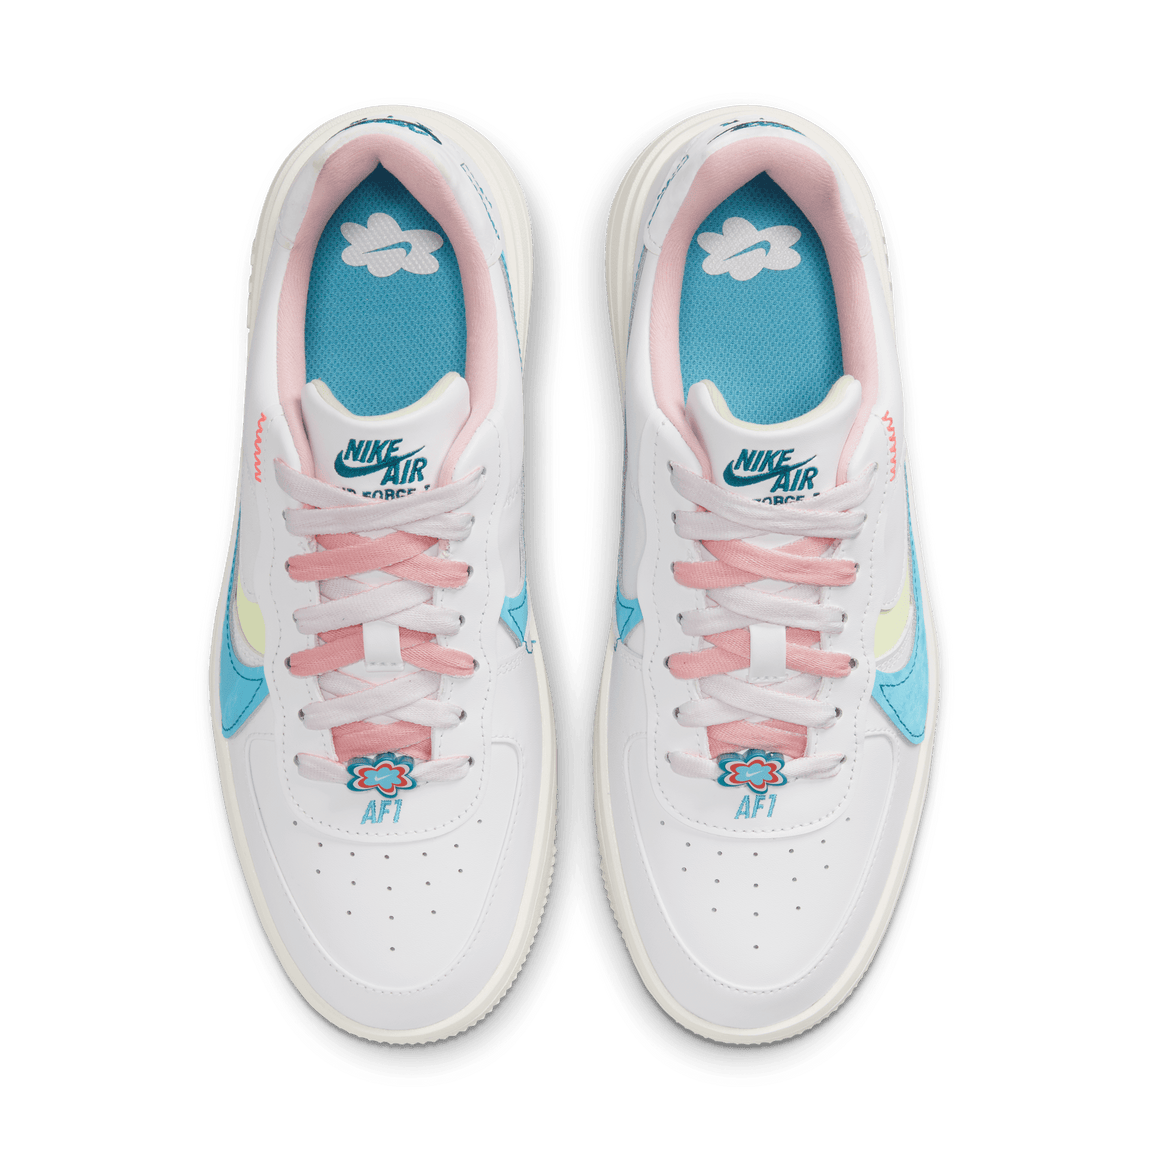 Nike Women's Air Force 1 PLT.AF.ORM (White/Baltic Blue-Medium Soft Pink) - Nike Women's Air Force 1 PLT.AF.ORM (White/Baltic Blue-Medium Soft Pink) - 